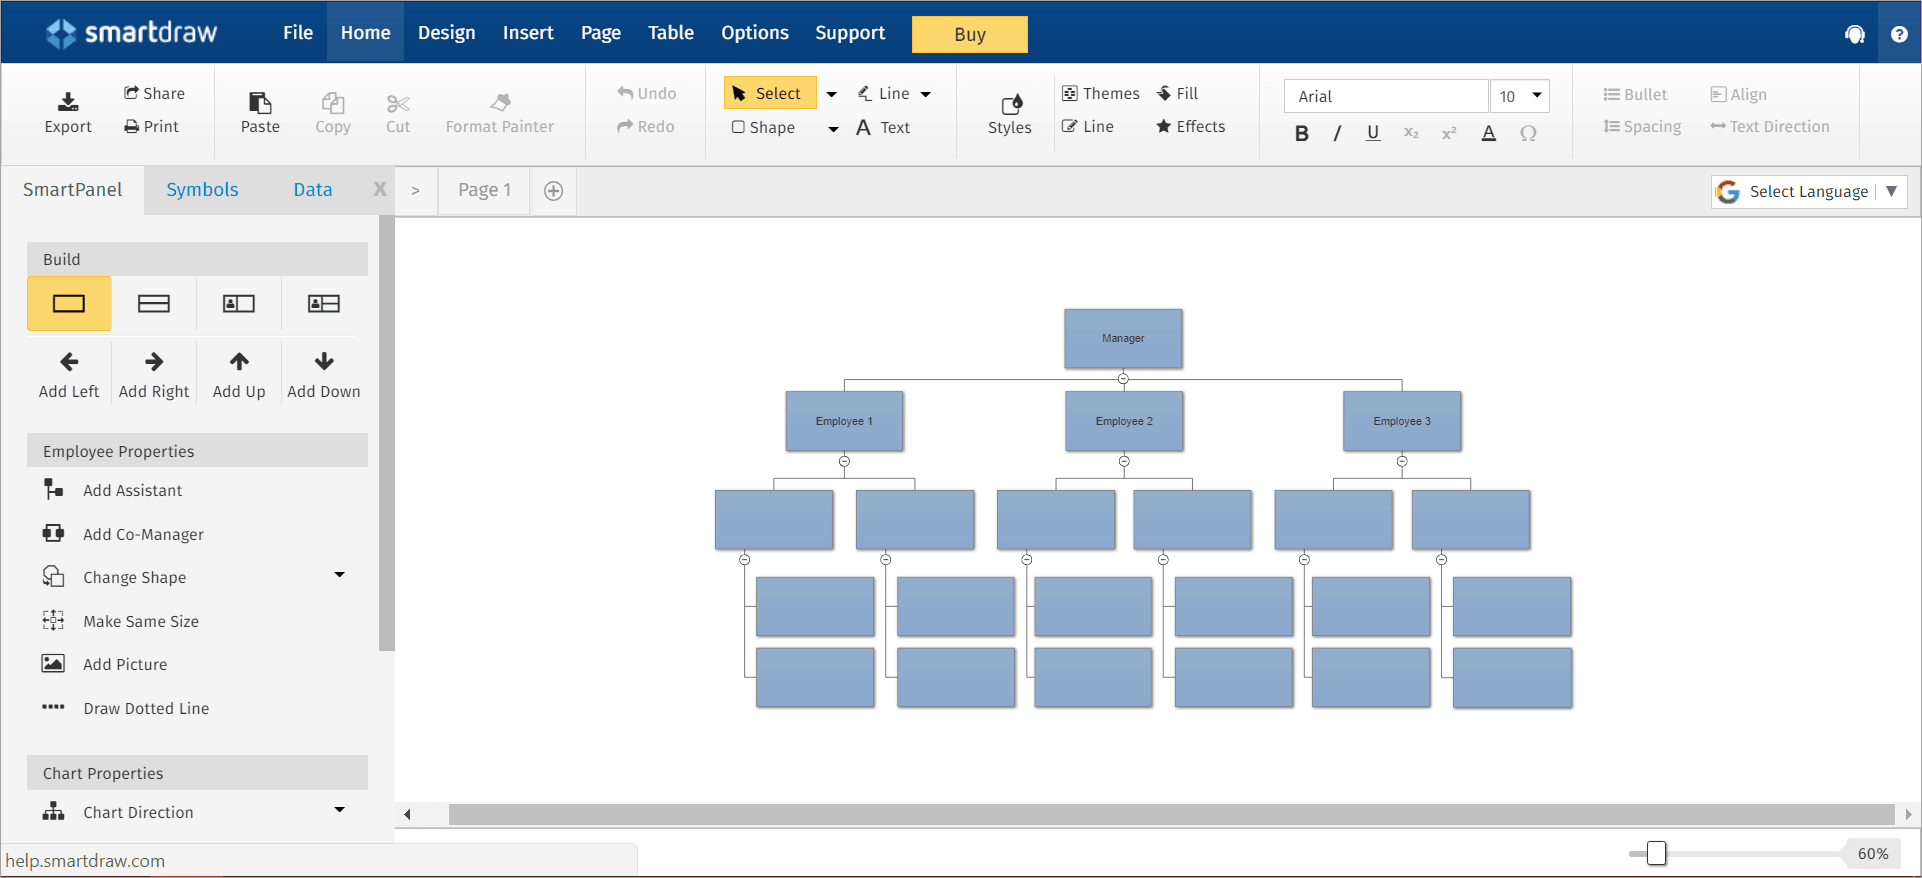 How to edit an org chart on SmartDraw